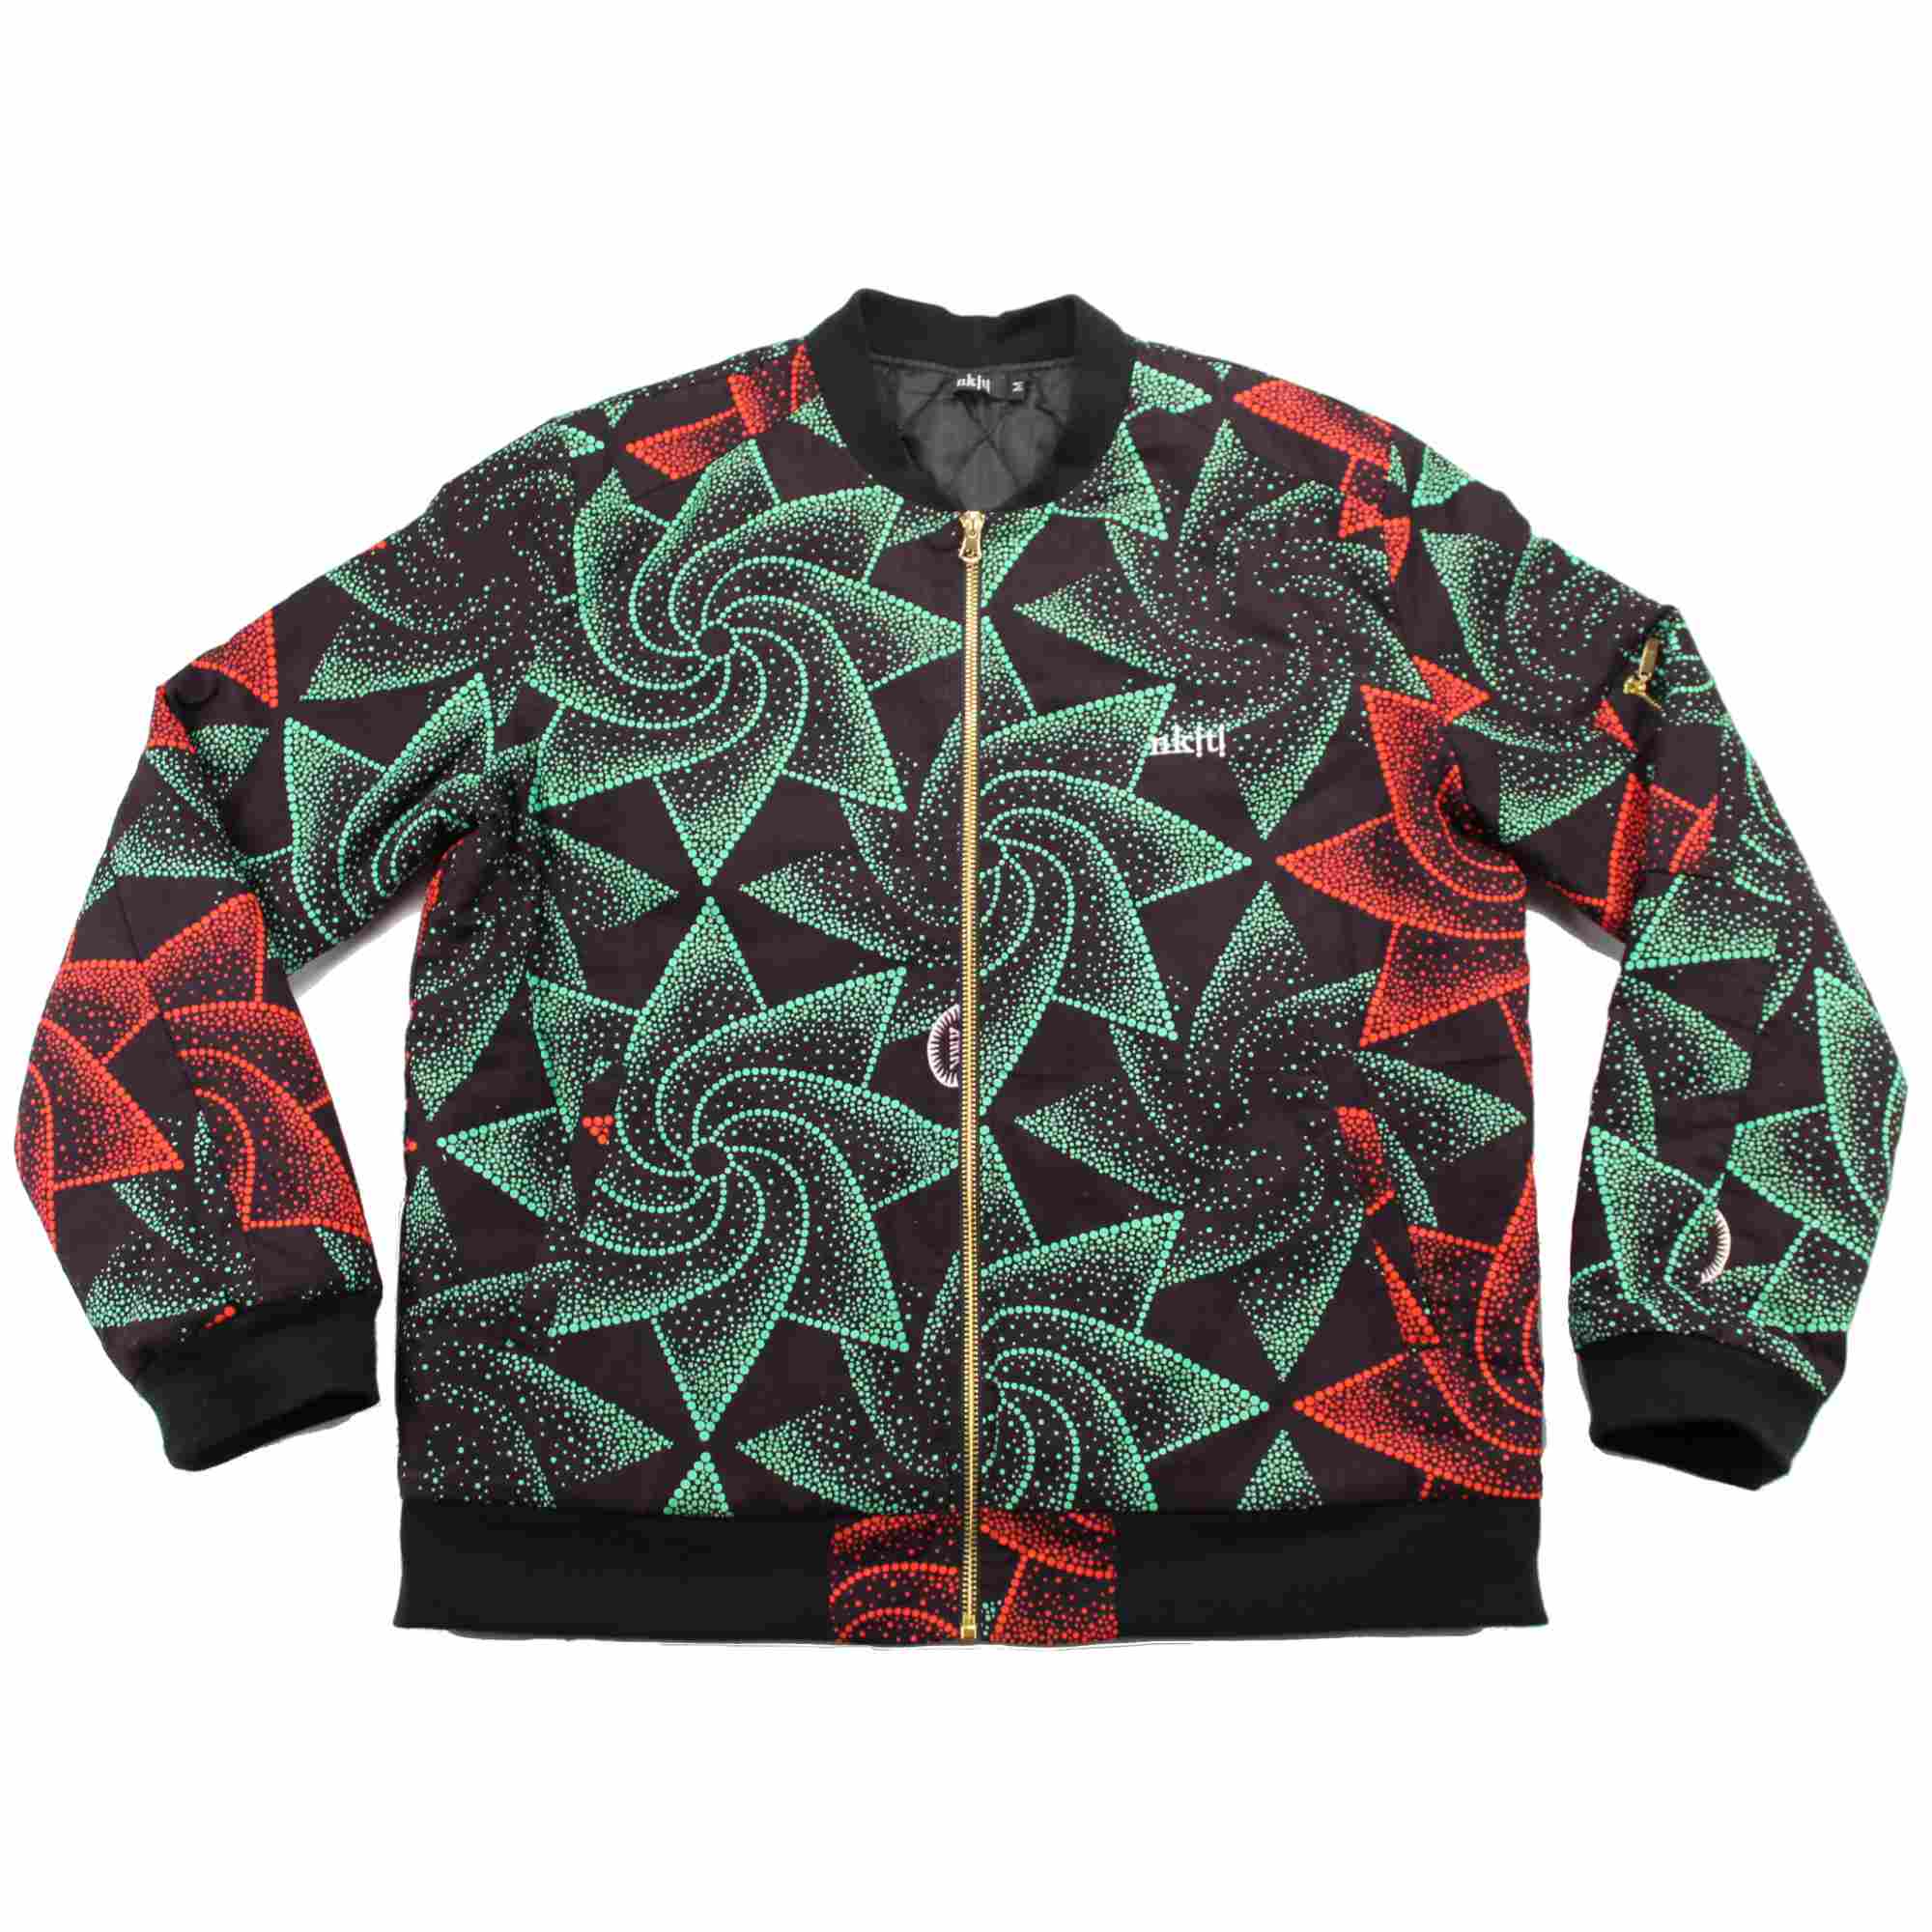 African print puffer jacket teal red